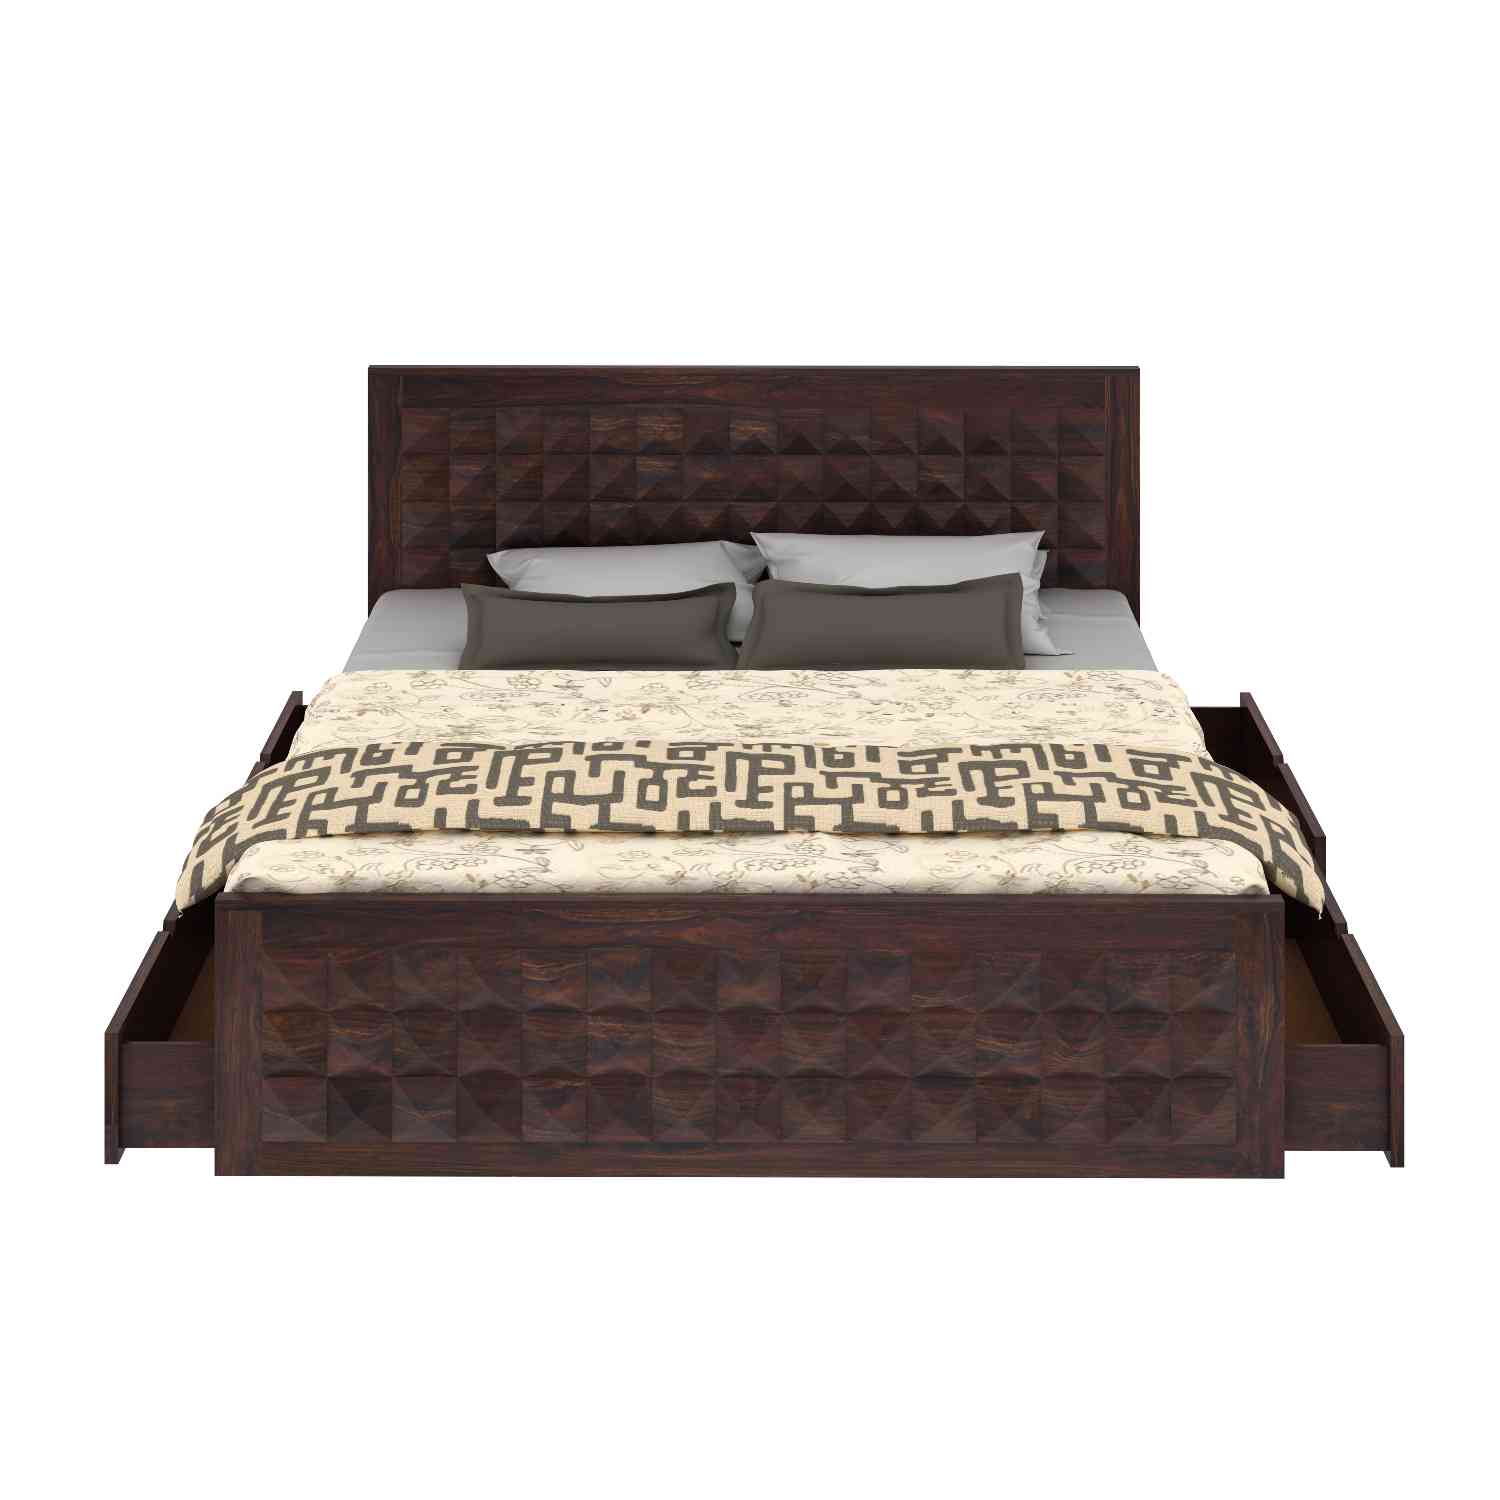 Sofia Solid Sheesham Wood Bed With Four Drawers (Queen Size, Walnut Finish)